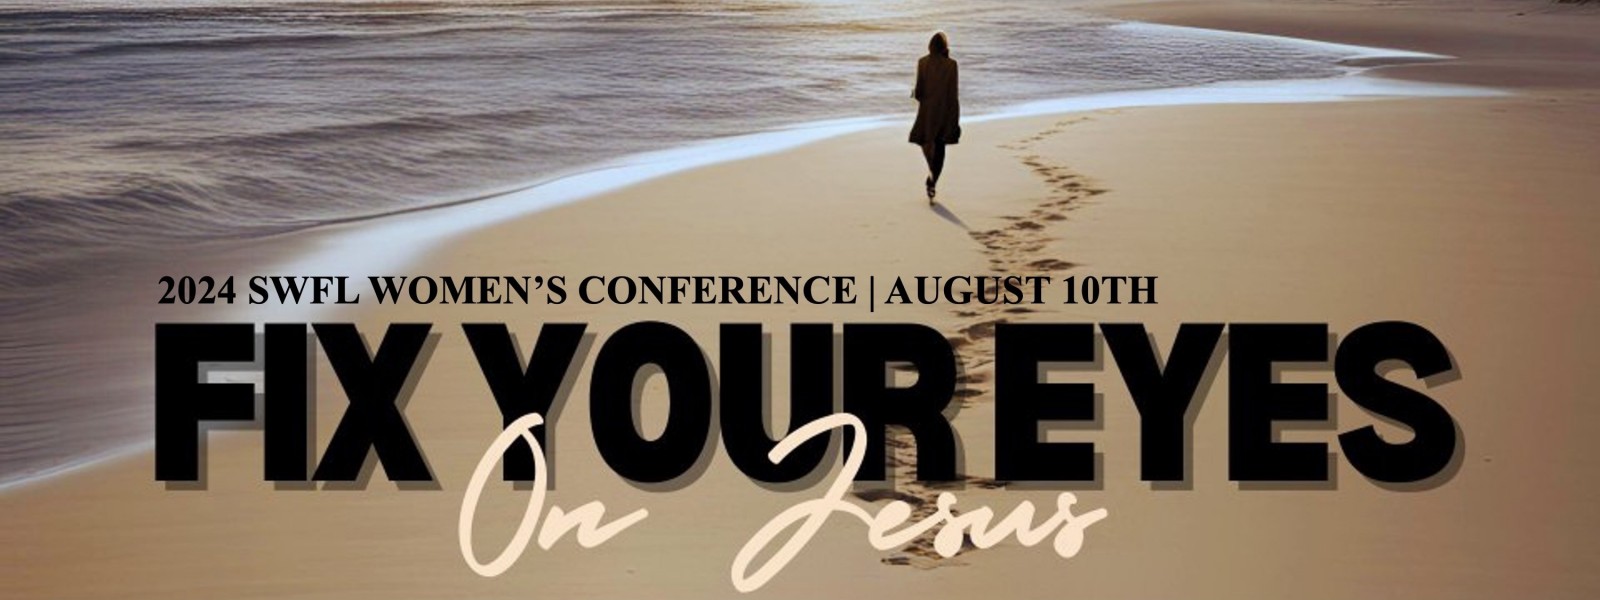 2024 SWFL Women's Conference, August 10th from 9:30 am - 5:00 pm